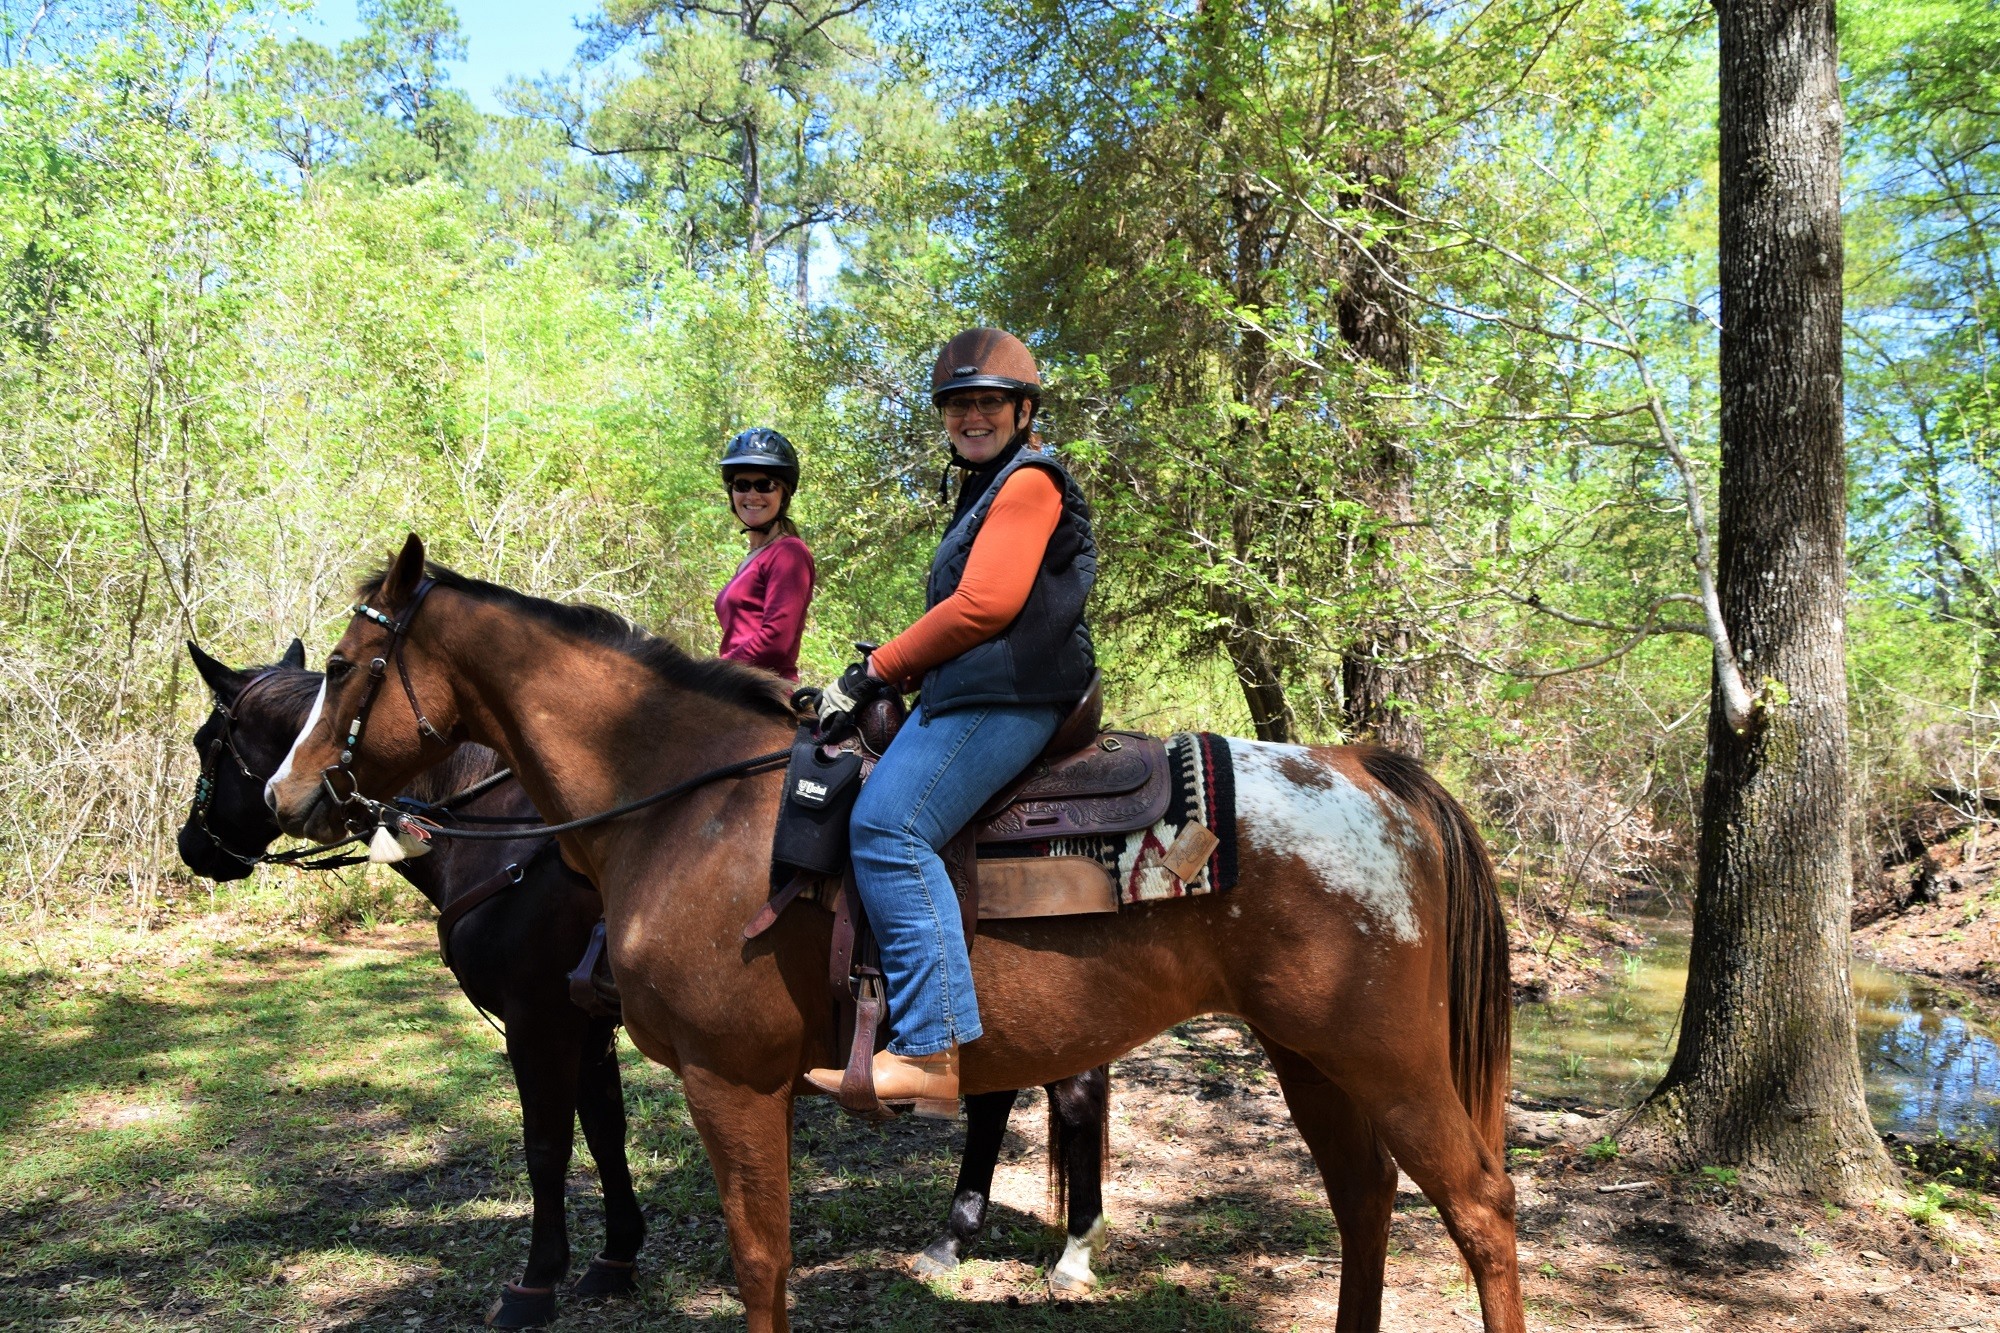 Historic Blakeley State Park - Carson Horse Camp in Alabama | Top Horse Trails